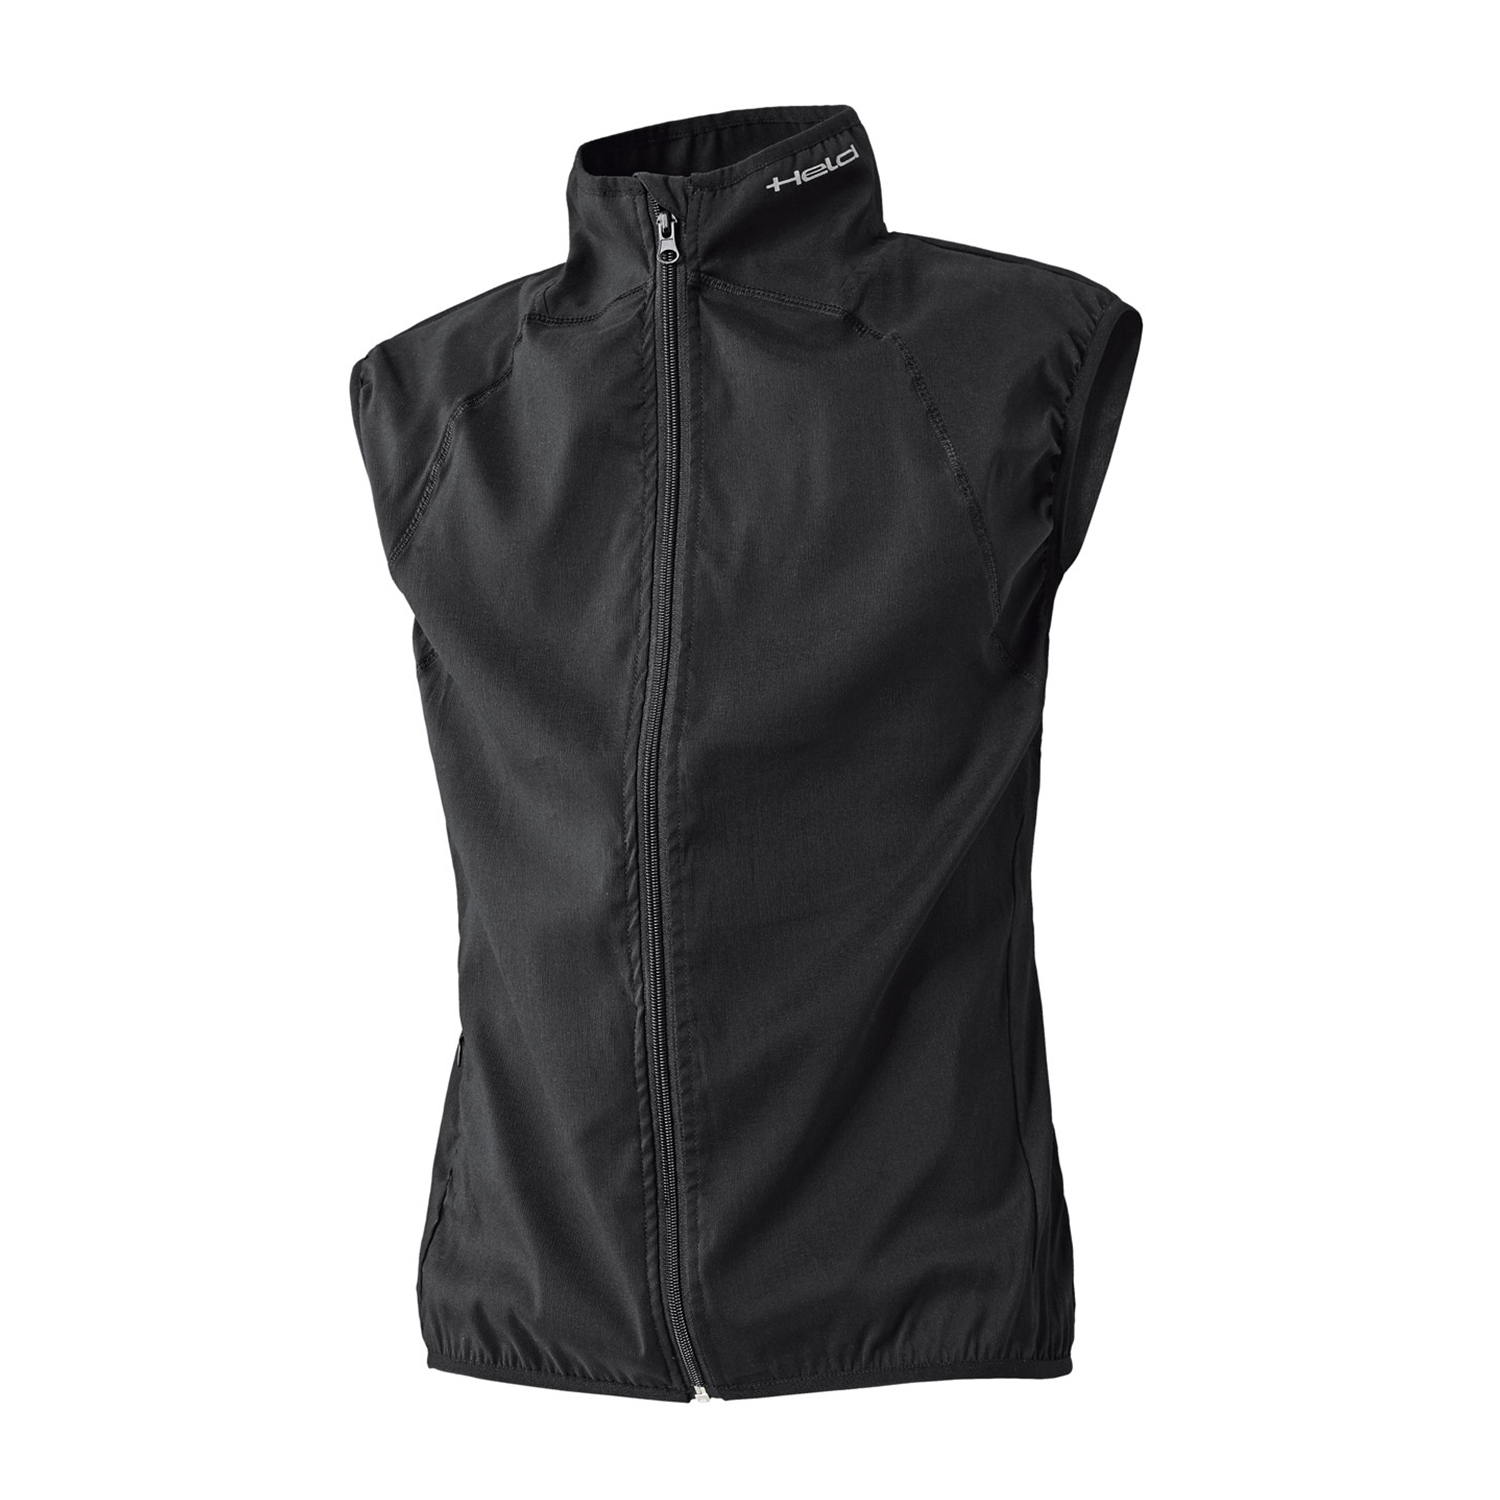 Held Windblock Vest Black - Available in Various Sizes